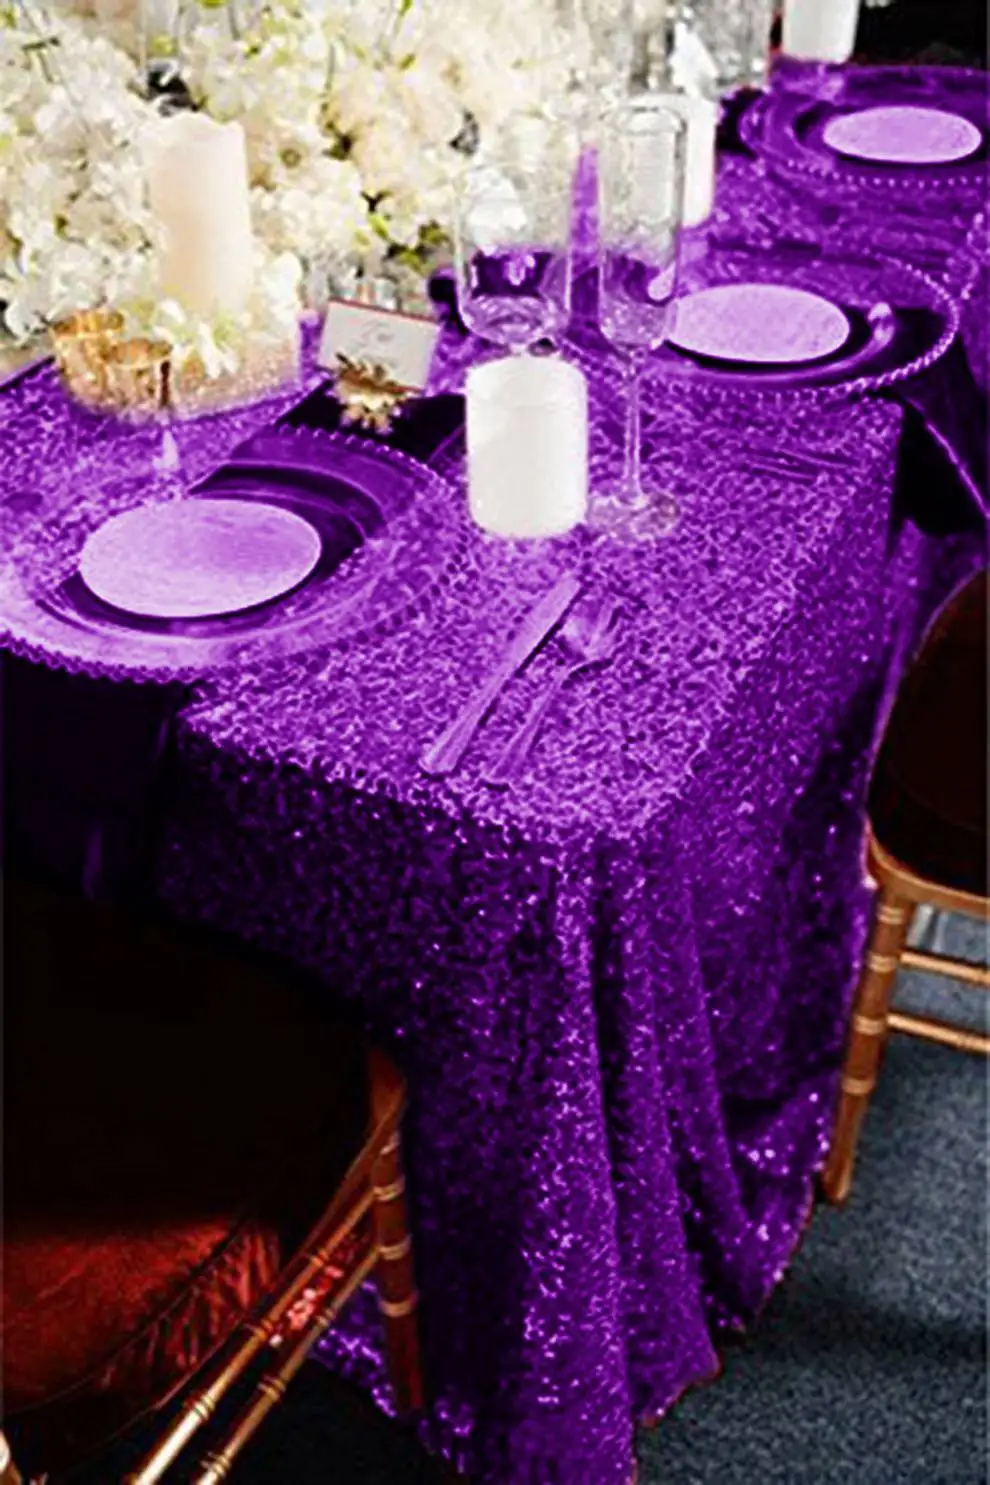 Glitter Tablecloth Purple Sequin Tablecloths 50x80 Inch Elegant Table Cover Sequin Overlay Party Decorations Table Skirt-M1018